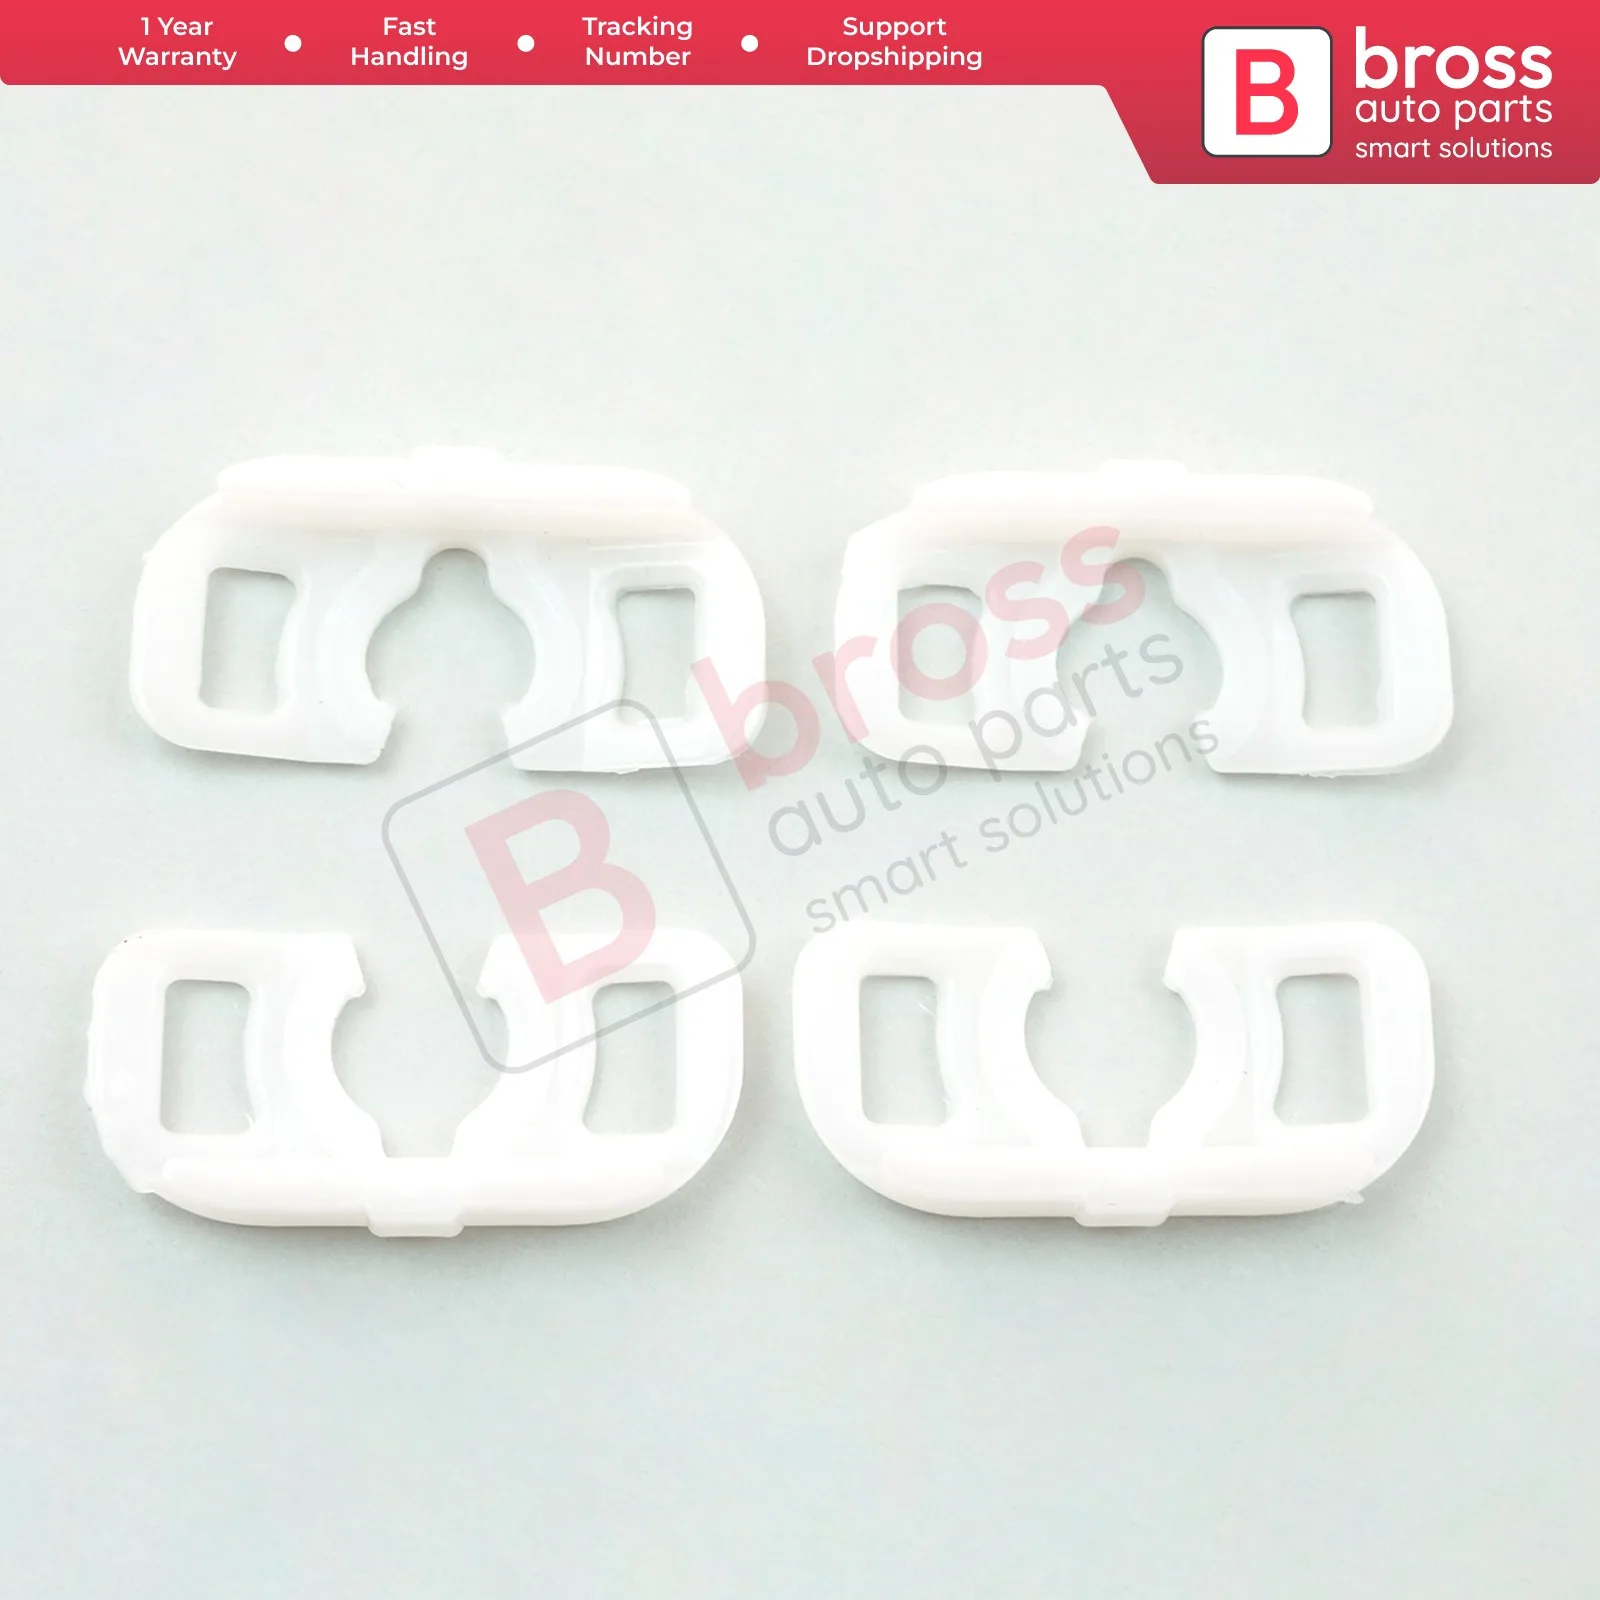 

Bross Auto Parts BWR5111 4 Pieces Electrical Power Window Regulator Repair Clamp Clips Type:2 Fast Shipment Ship From Turkey